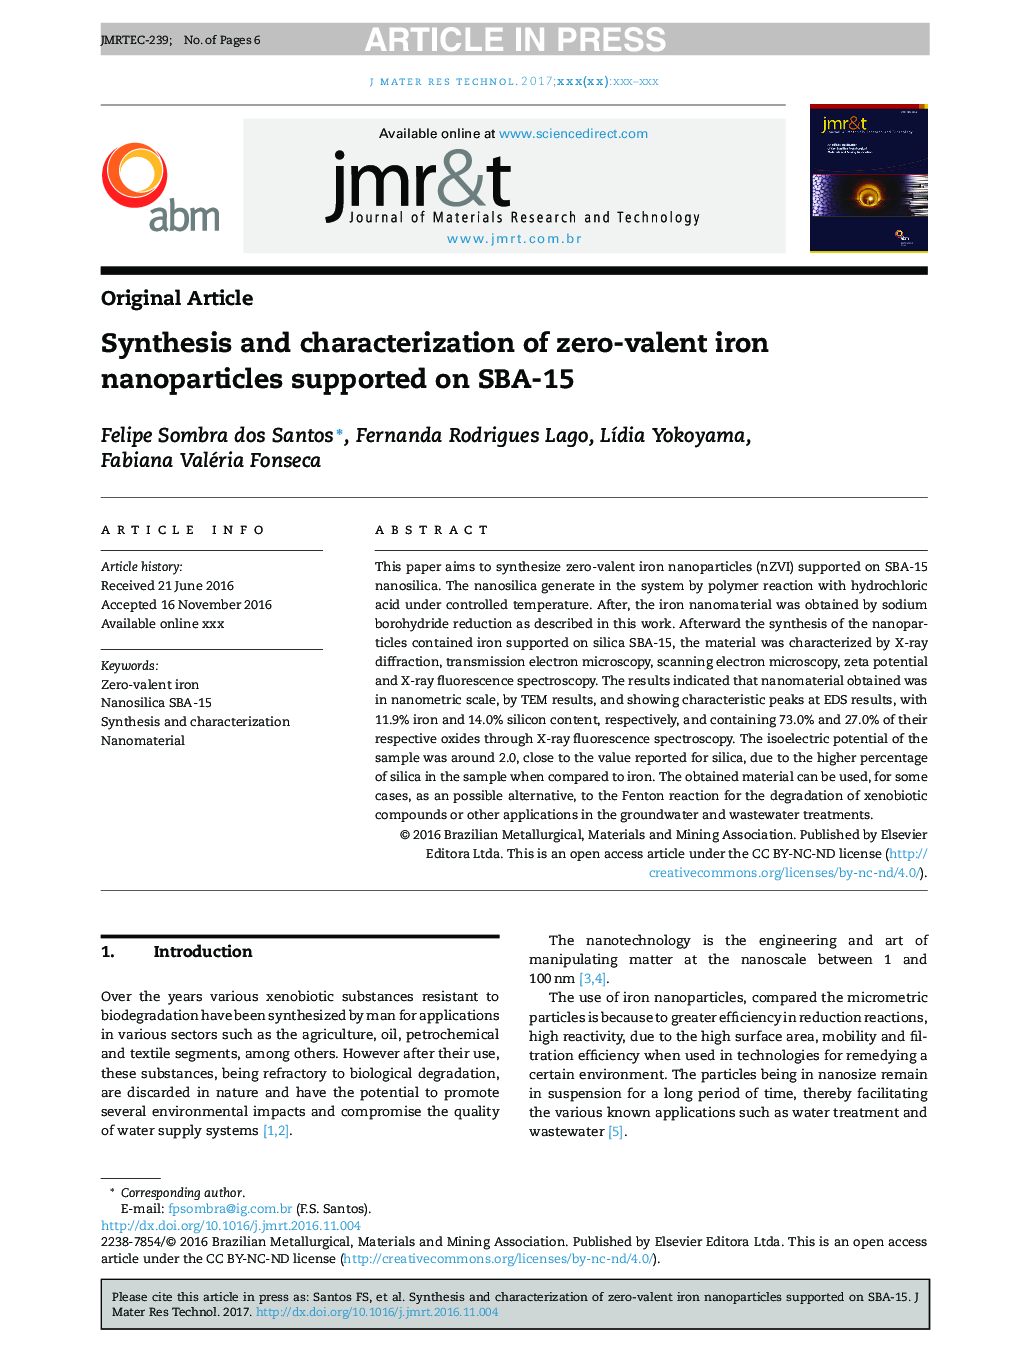 Synthesis and characterization of zero-valent iron nanoparticles supported on SBA-15